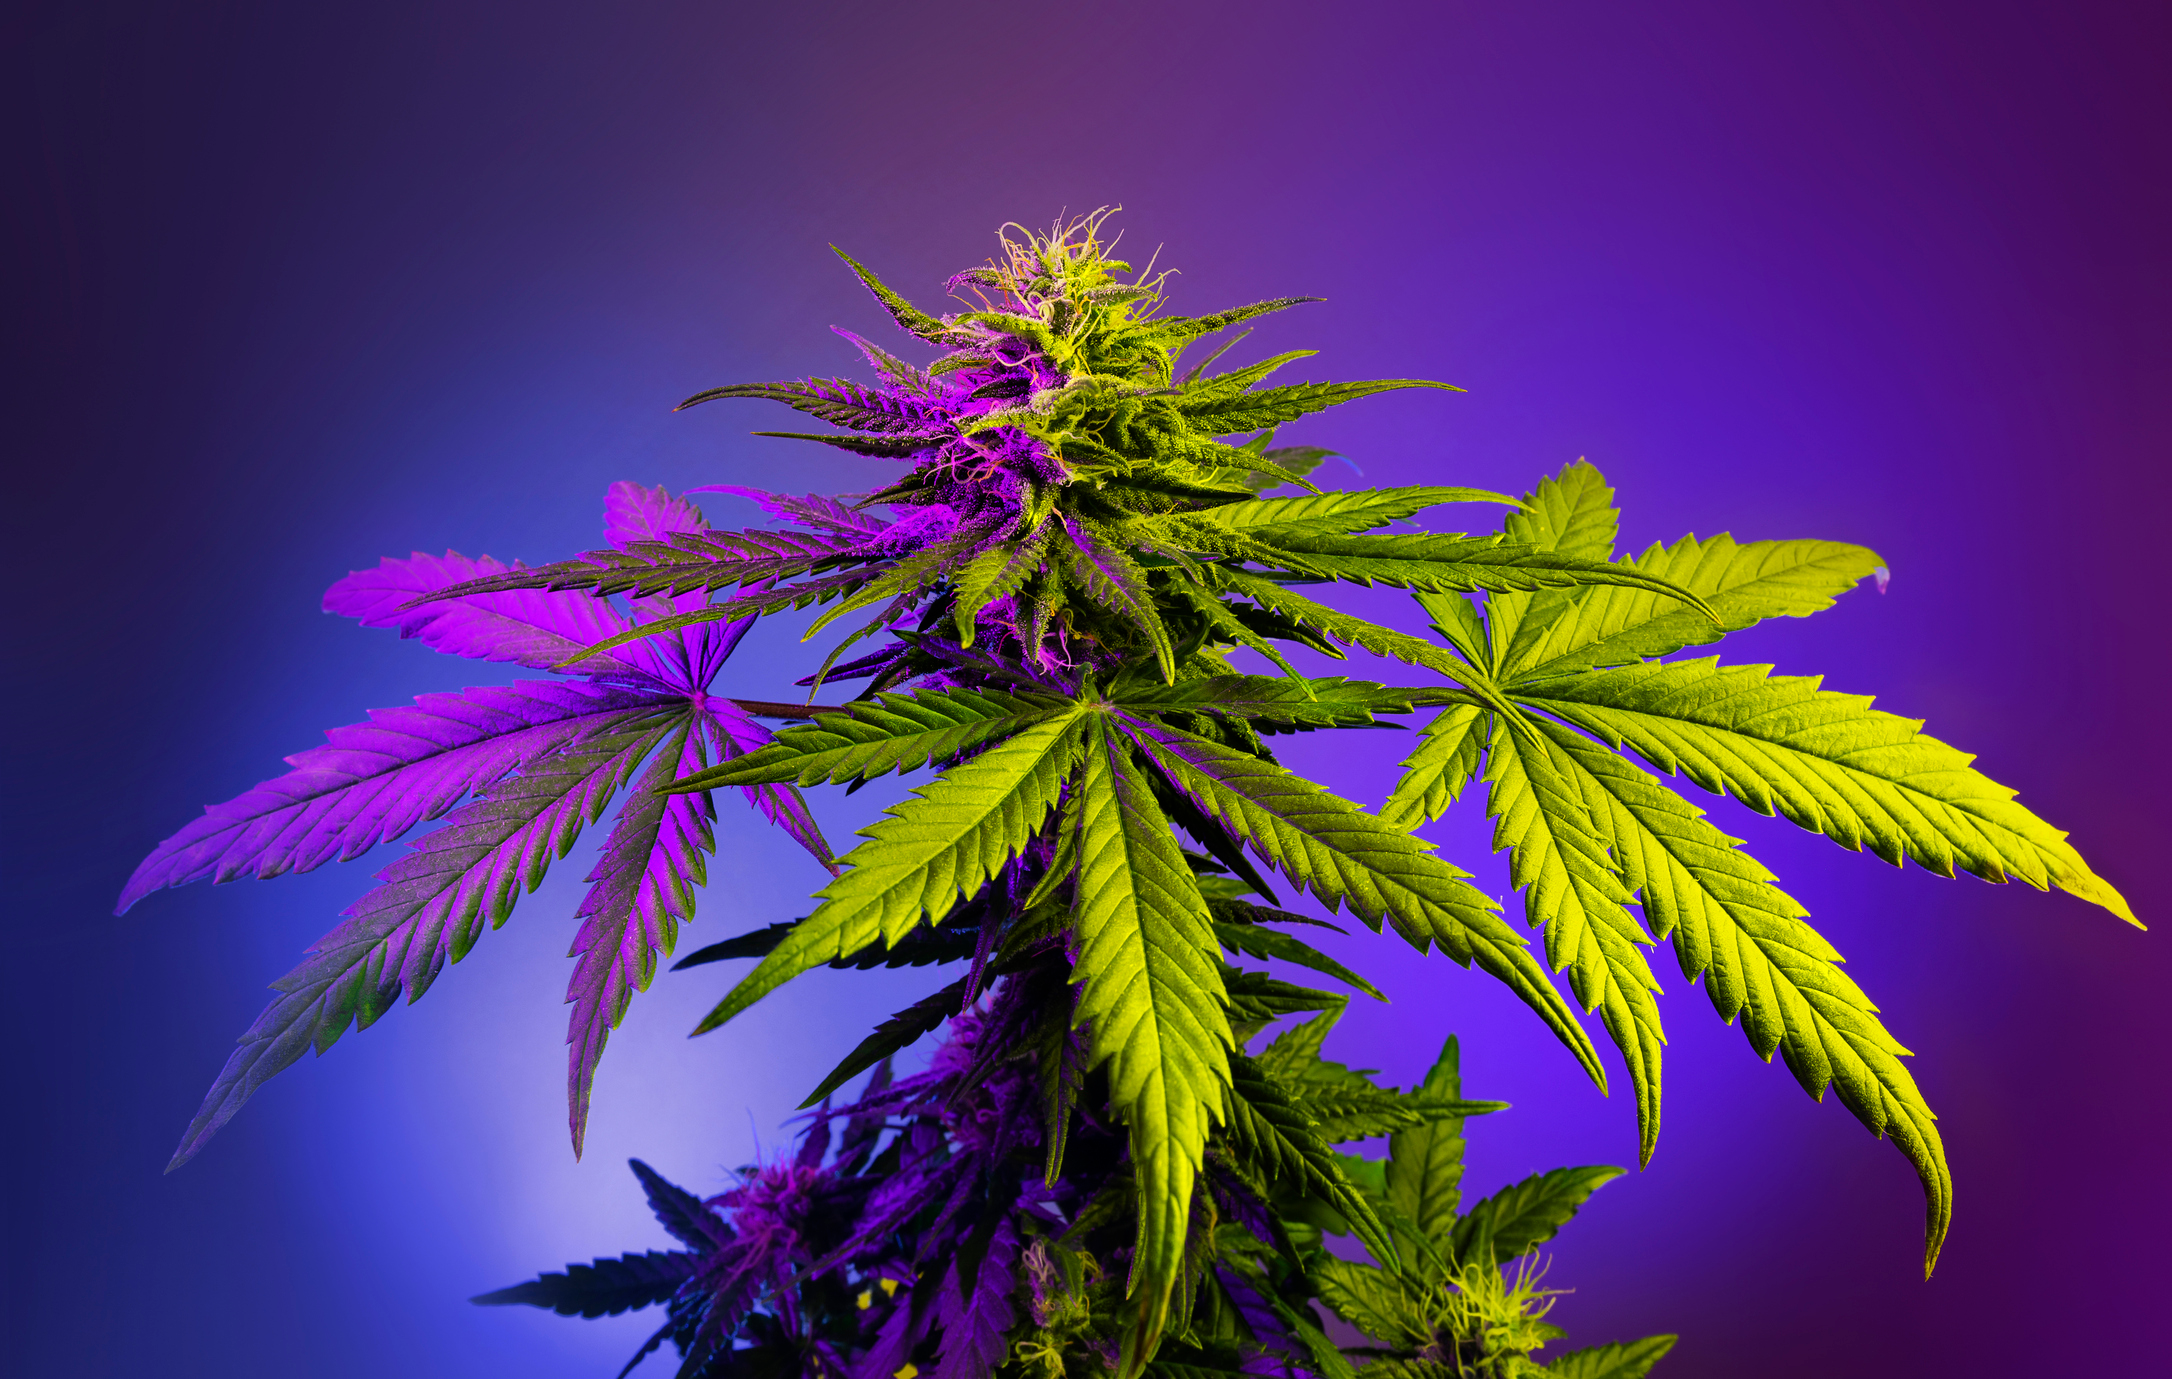 growing cannabis plant, close up with a glowing purple backdrop